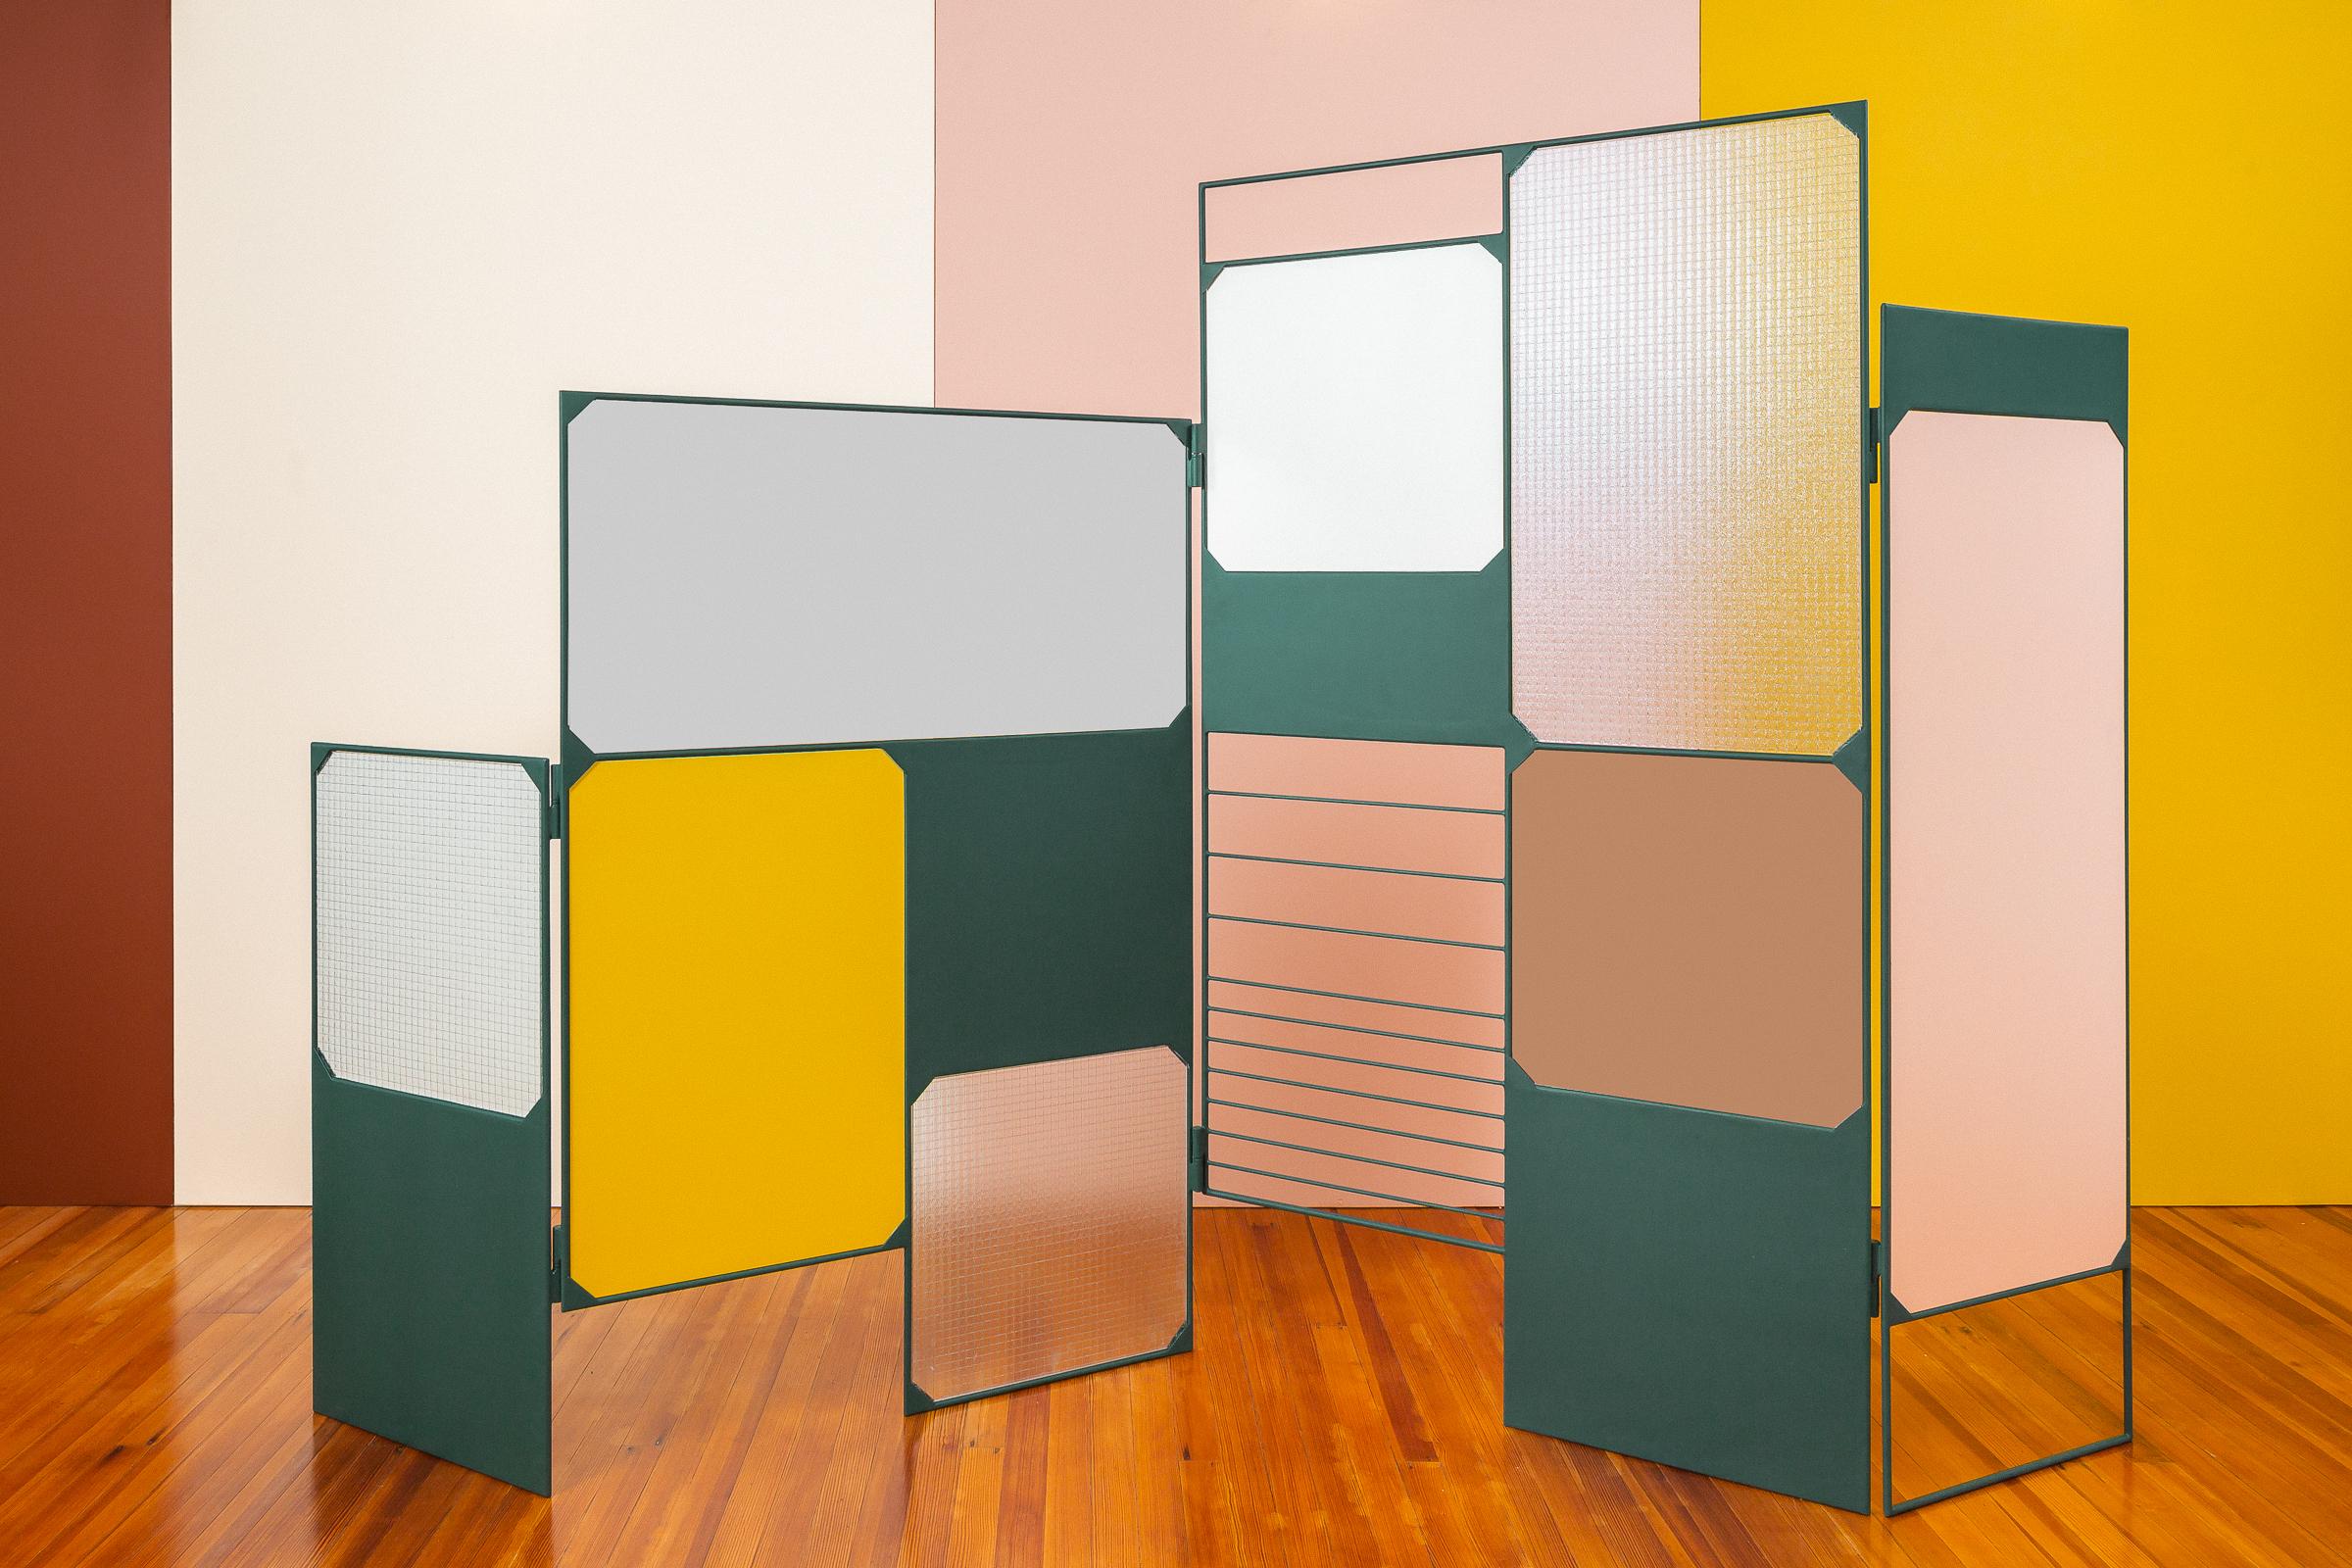 Welcome Biombo Room Divider by Sofia Alvarado
Unique piece
Materials: Metal base, Guayacan wood, mirror glass
Dimensions: 185cm (H) x 300cm (W)

FI is an ornamental artist who embodies the creative revelation of the sensitivity of the innate being,